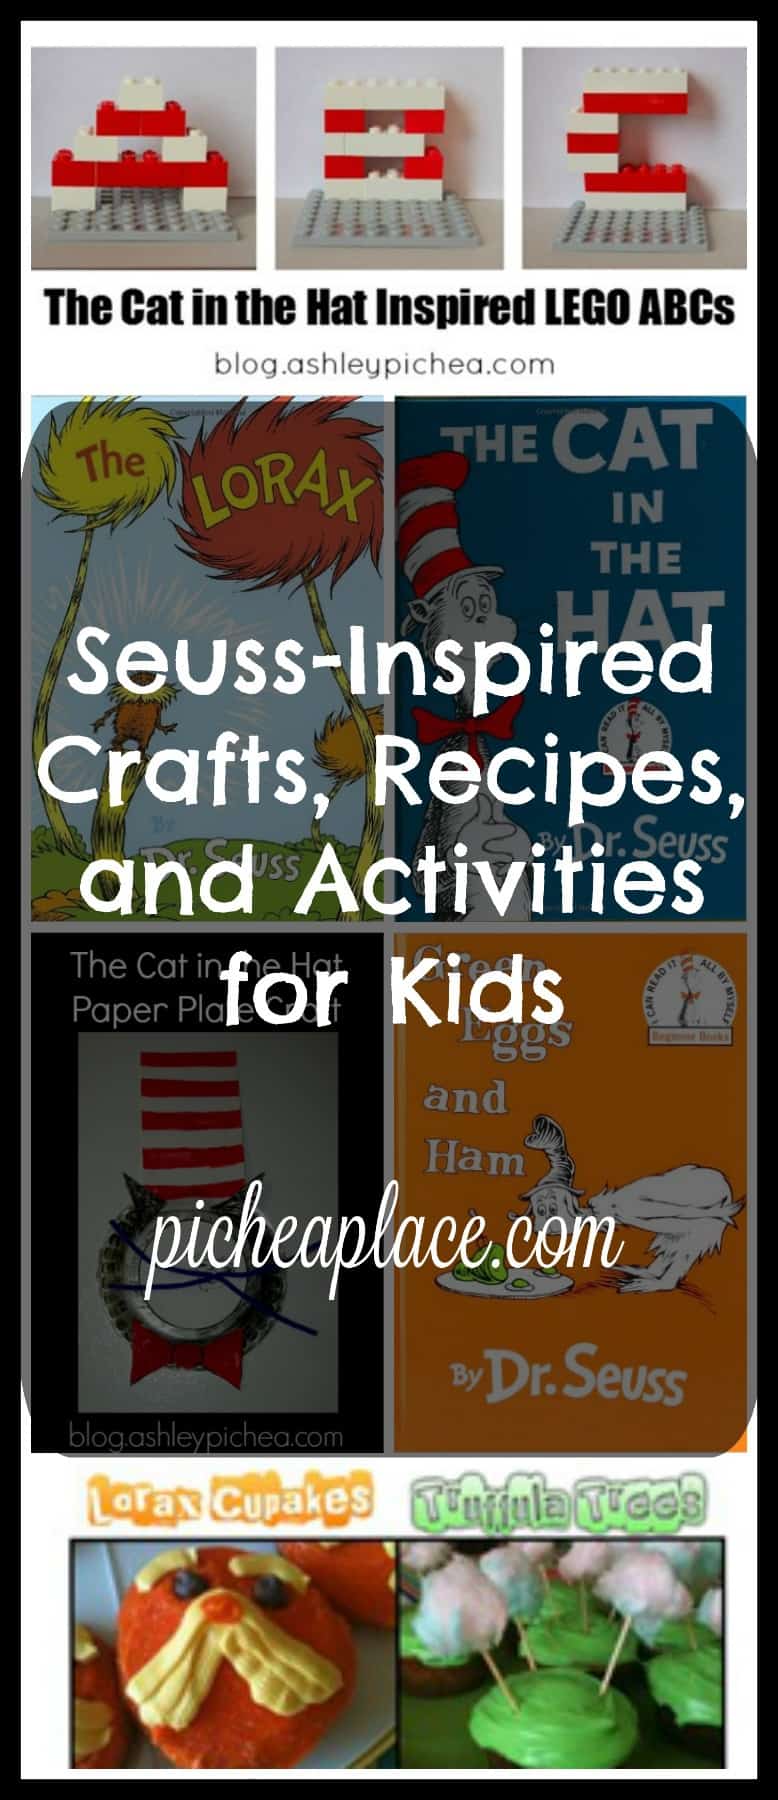 Seuss-Inspired Crafts, Recipes, and Activities for Kids | great ideas for celebrating Dr. Seuss' birthday as a family